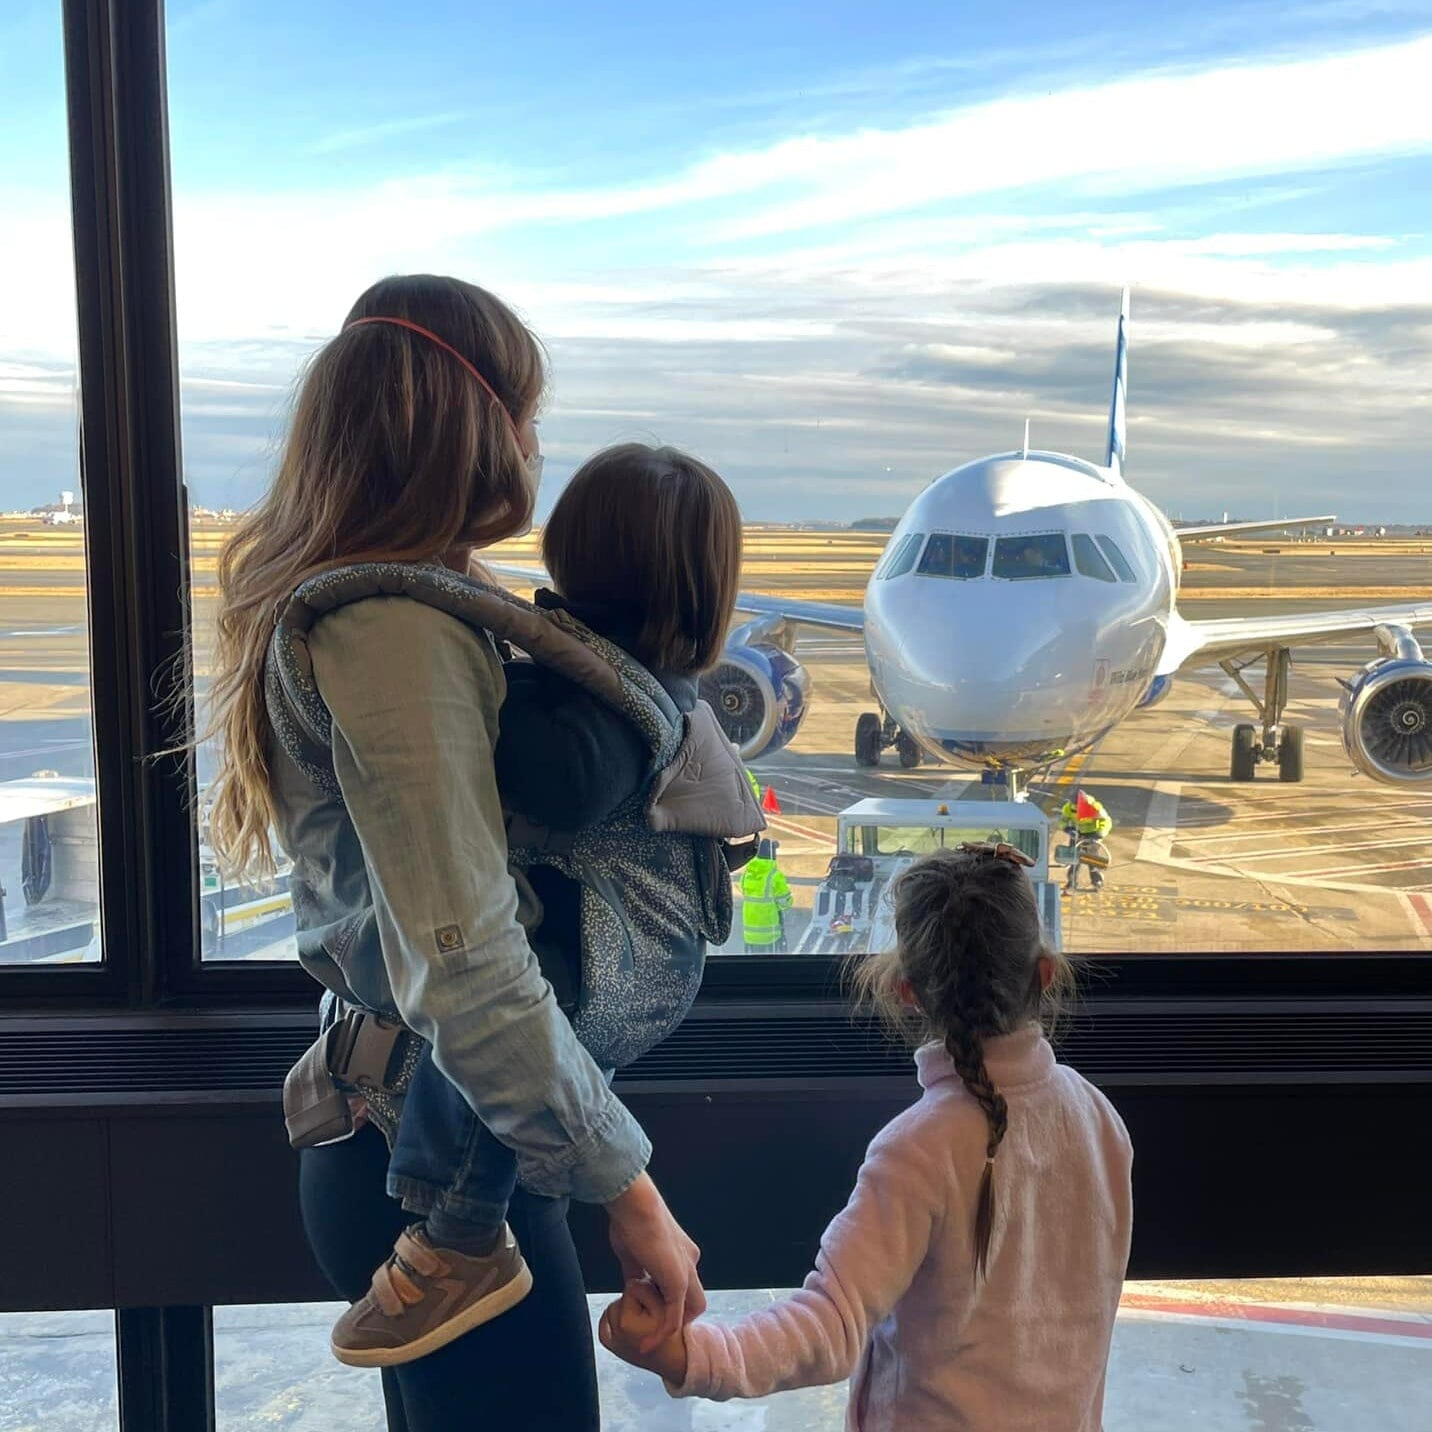 Woman holding a child's hand with another in a Lillebaby carrier looking out a window at an airplane